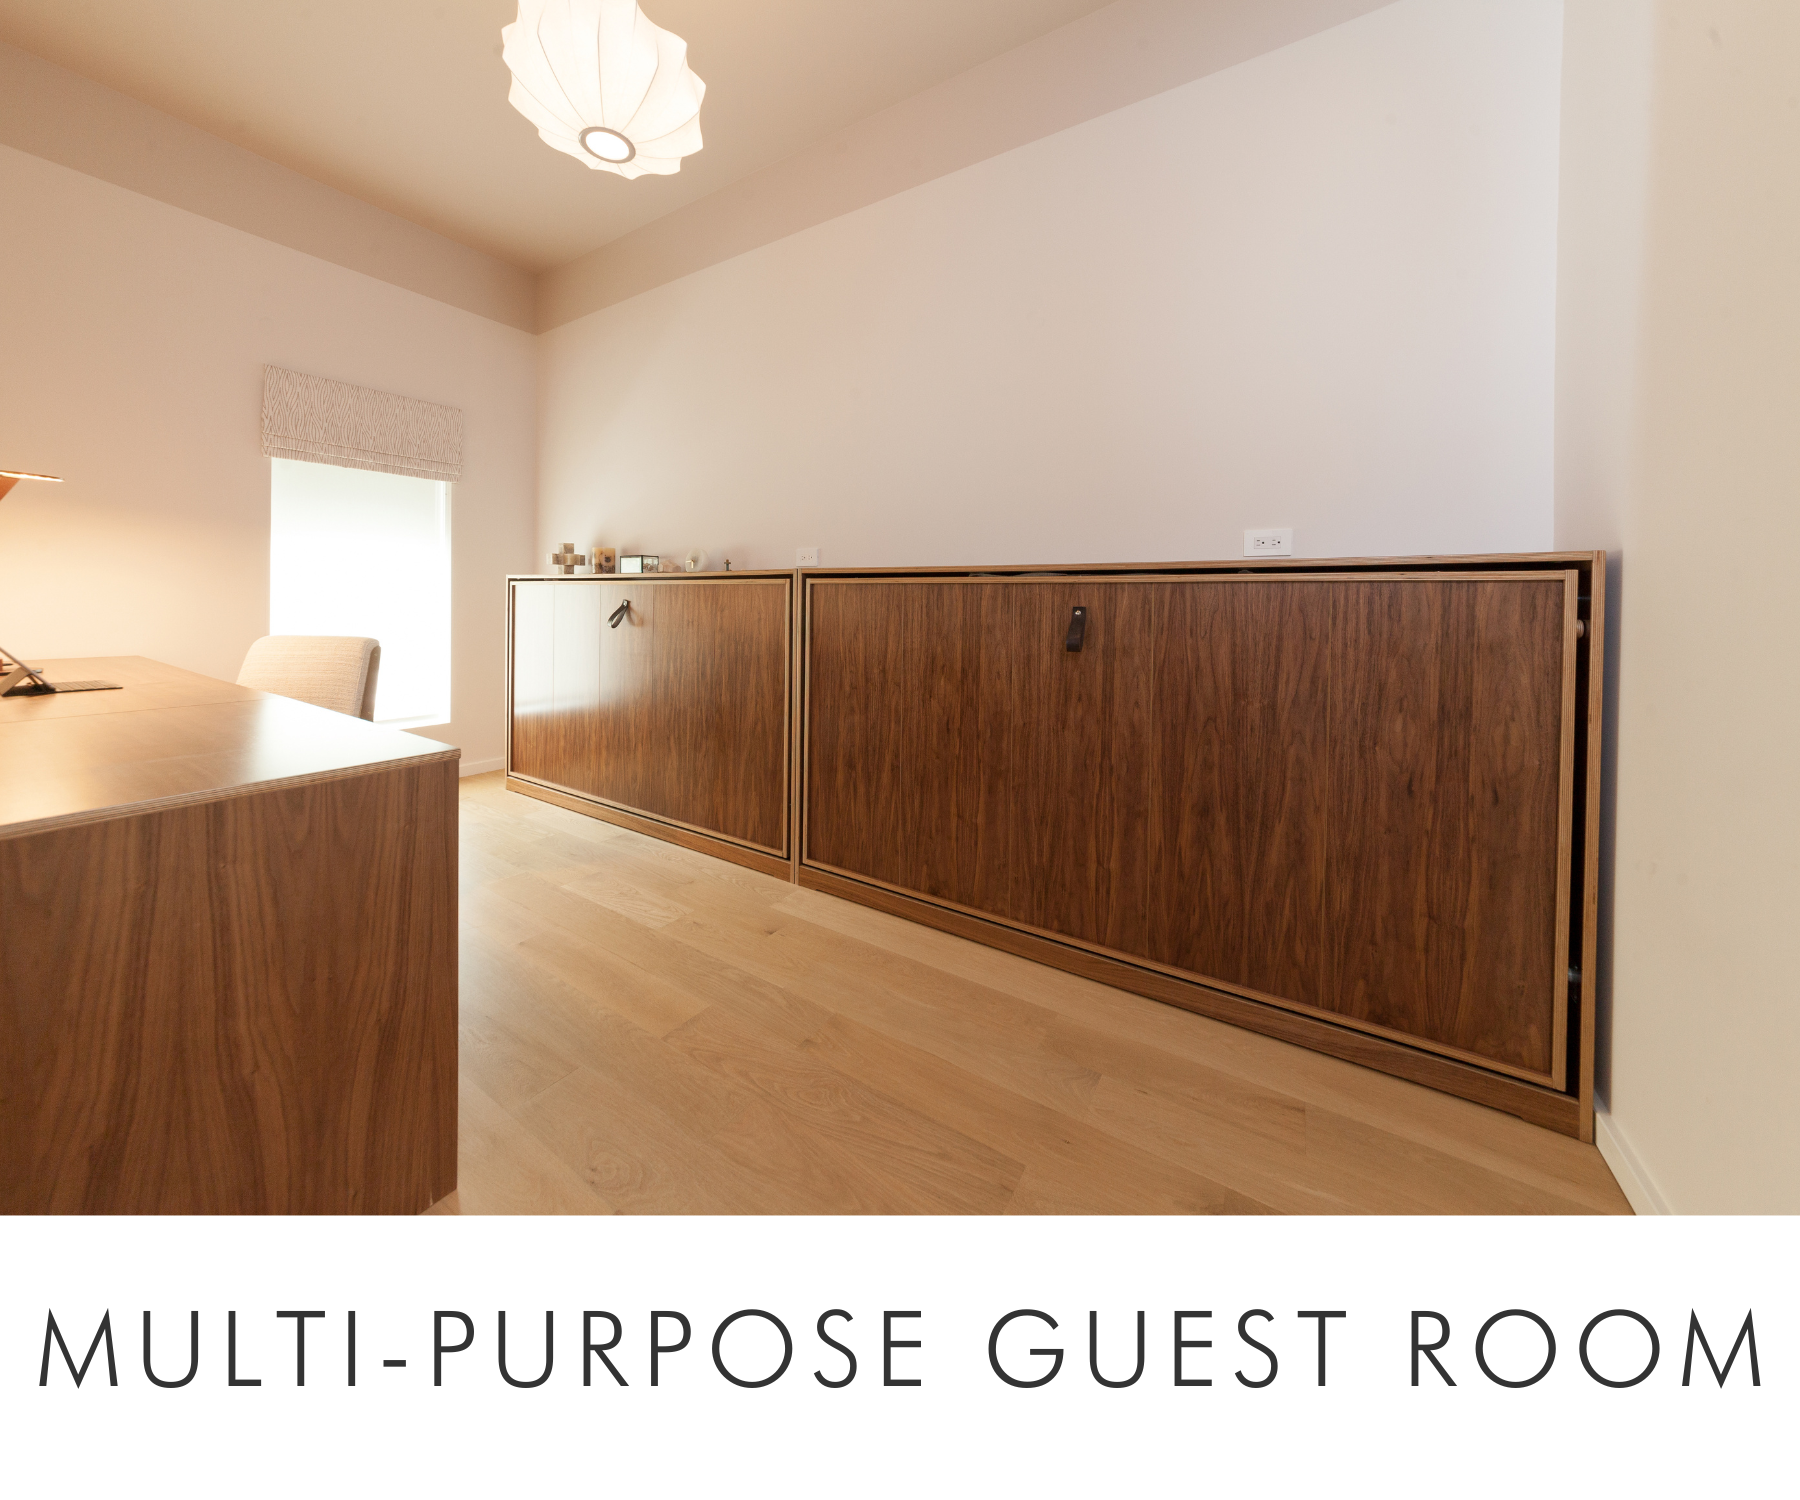 Multi-purpose minimalist guest room with sleek wooden storage cabinets along the wall and soft lighting.